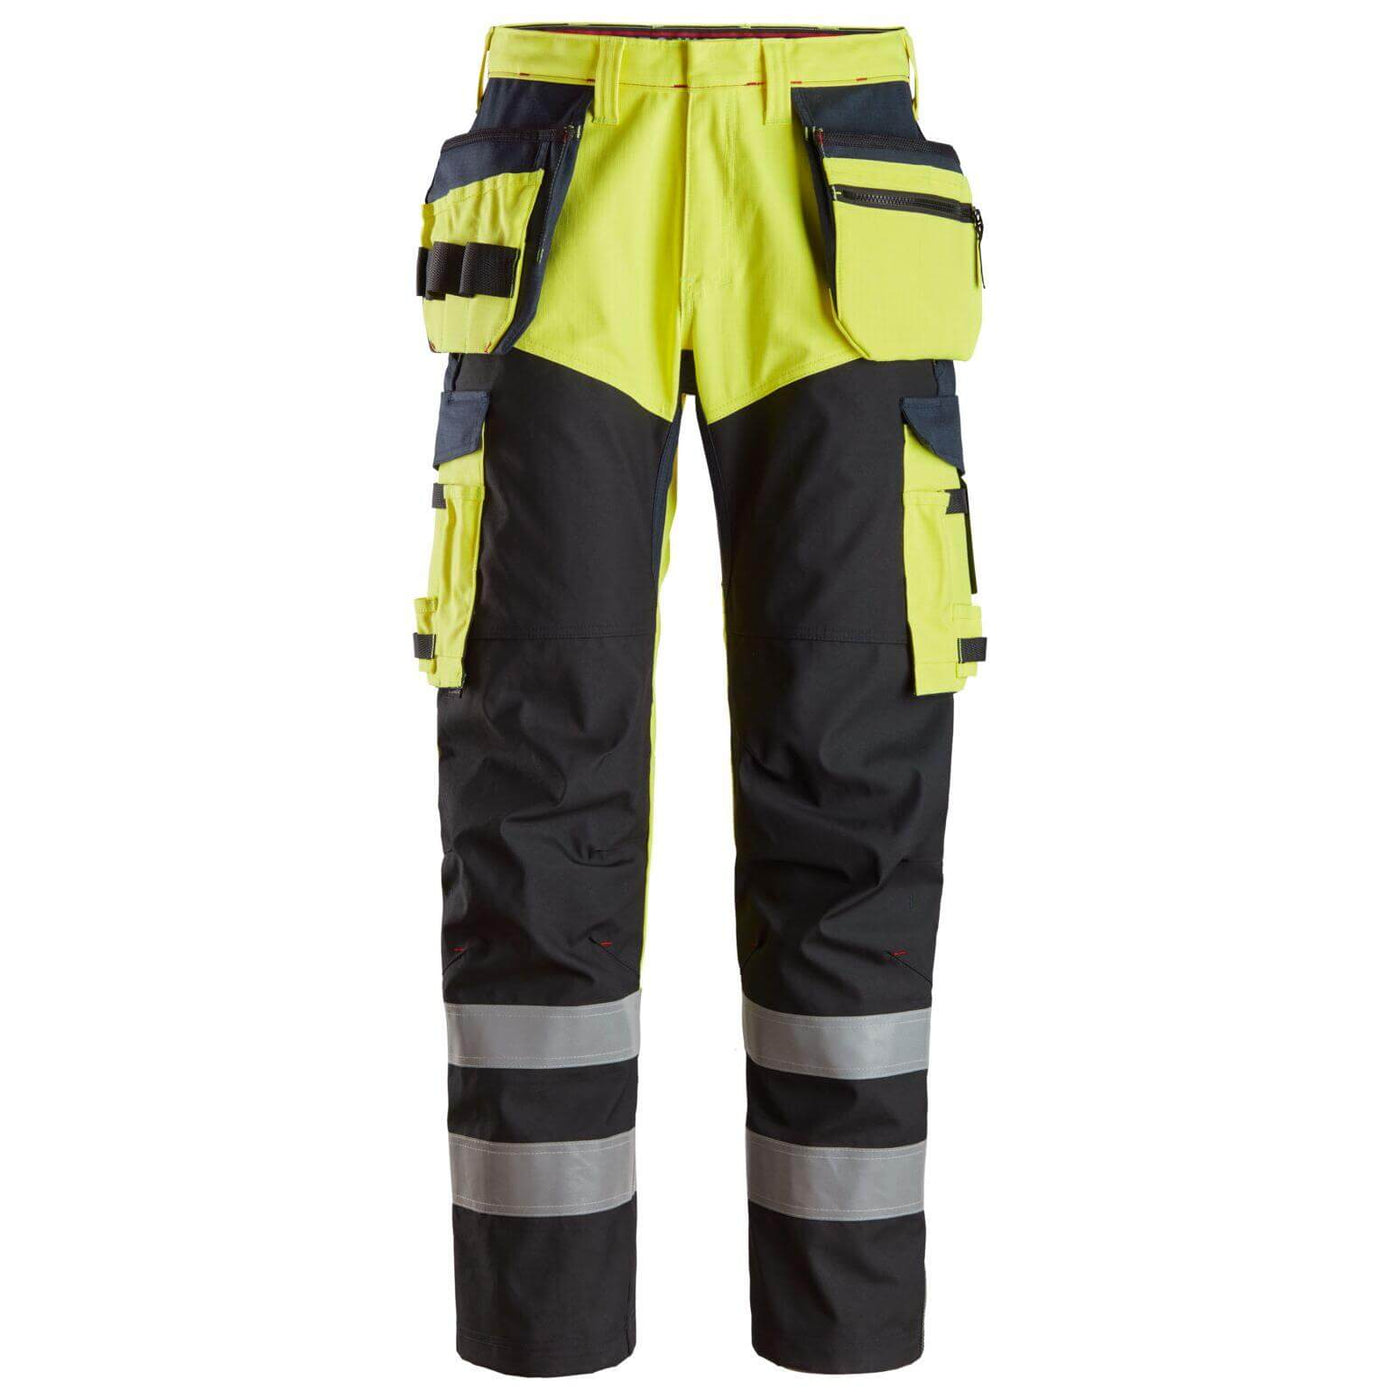 Snickers 6265 ProtecWork Hi Vis Trousers with Reinforced Front of Leg and Holster Pockets Class 1 Hi Vis Yellow Navy Blue 3710049 #colour_hi-vis-yellow-navy-blue